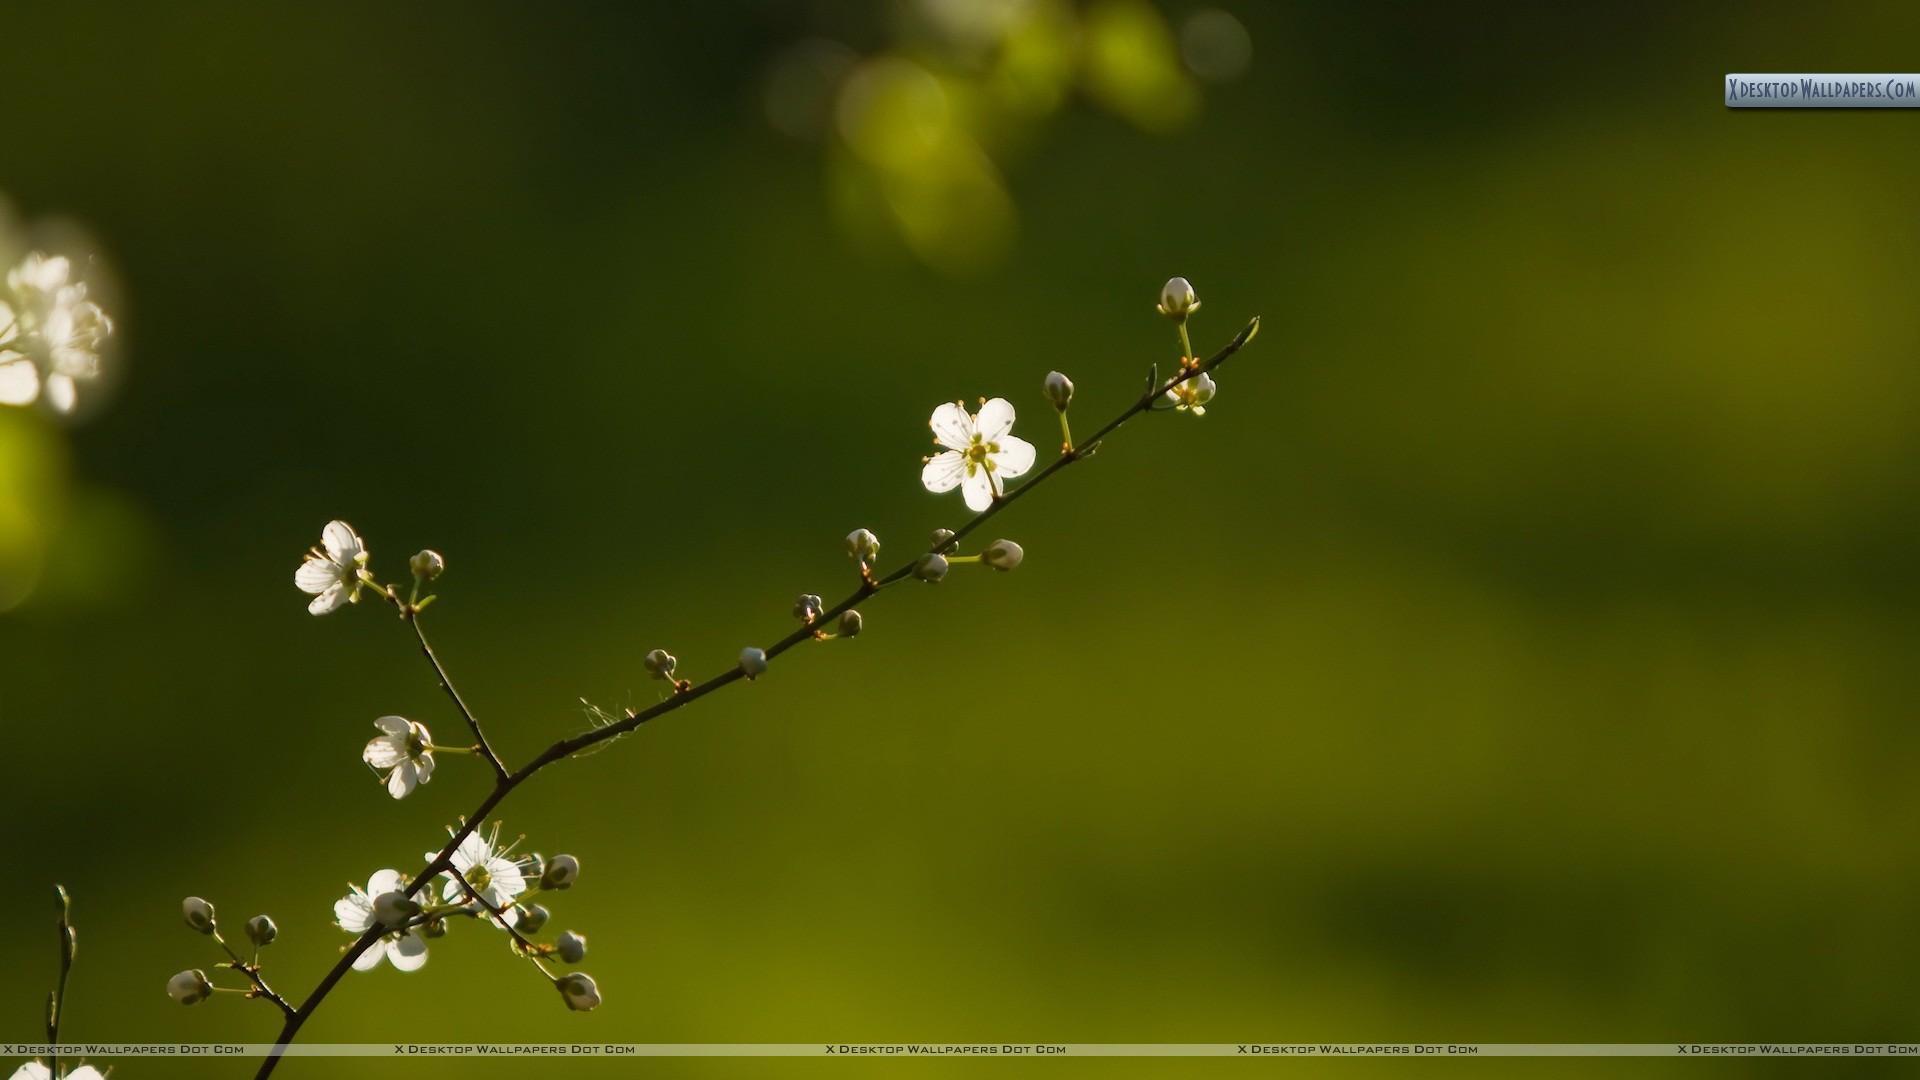 Small White Flowers On Branch Wallpaper